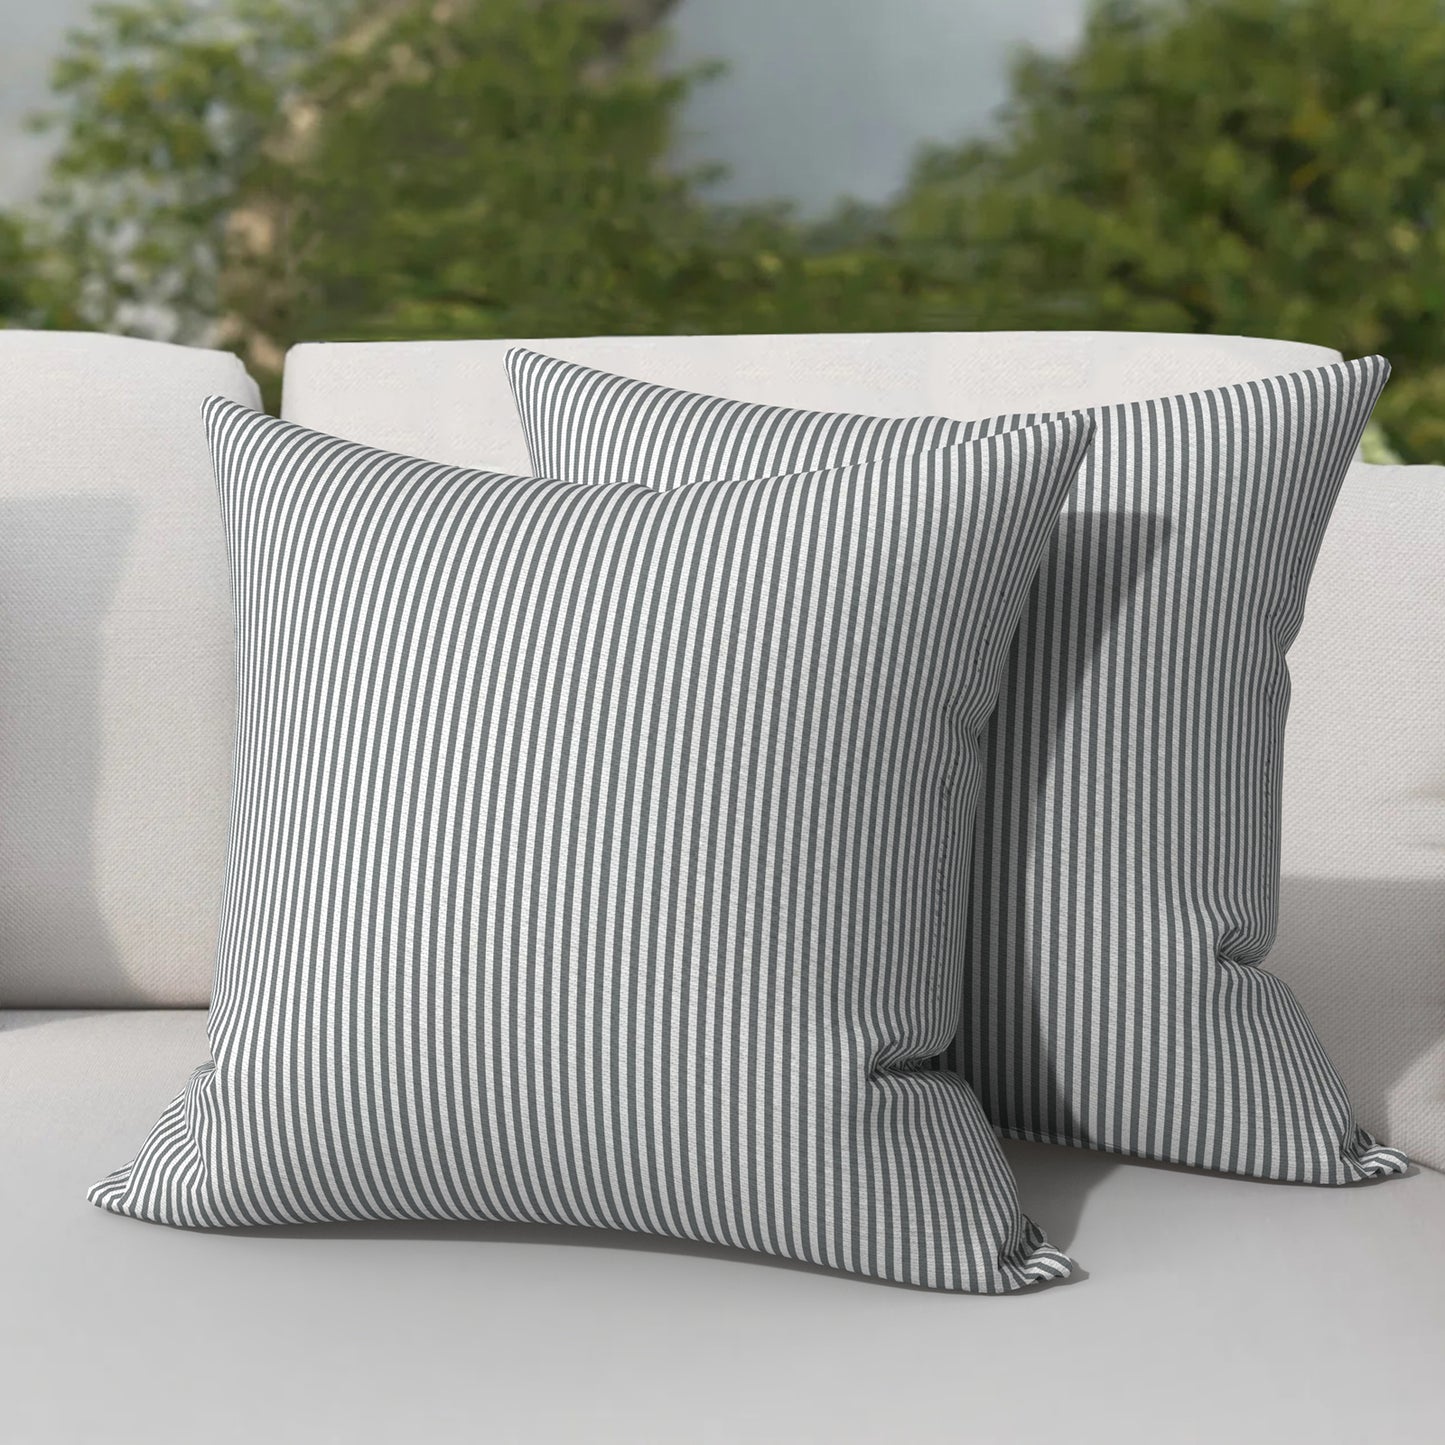 Melody Elephant Patio Throw Pillows with Inners, Fade Resistant Square Pillow Pack of 2, Decorative Garden Cushions for Home, 18x18 Inch, Stripe Gray